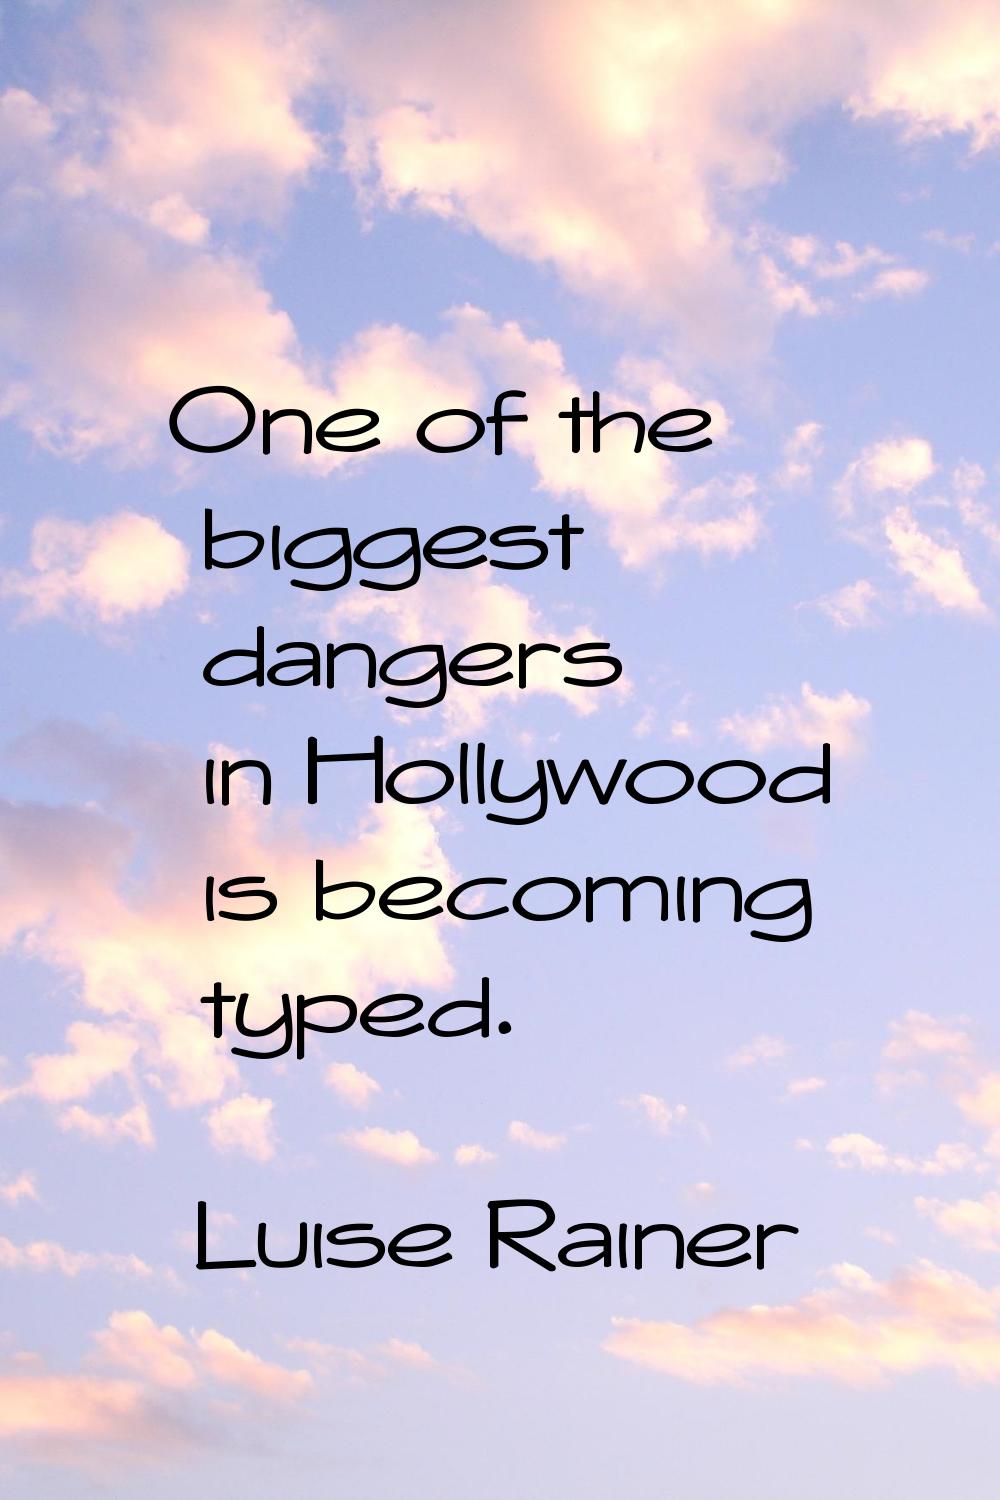 One of the biggest dangers in Hollywood is becoming typed.